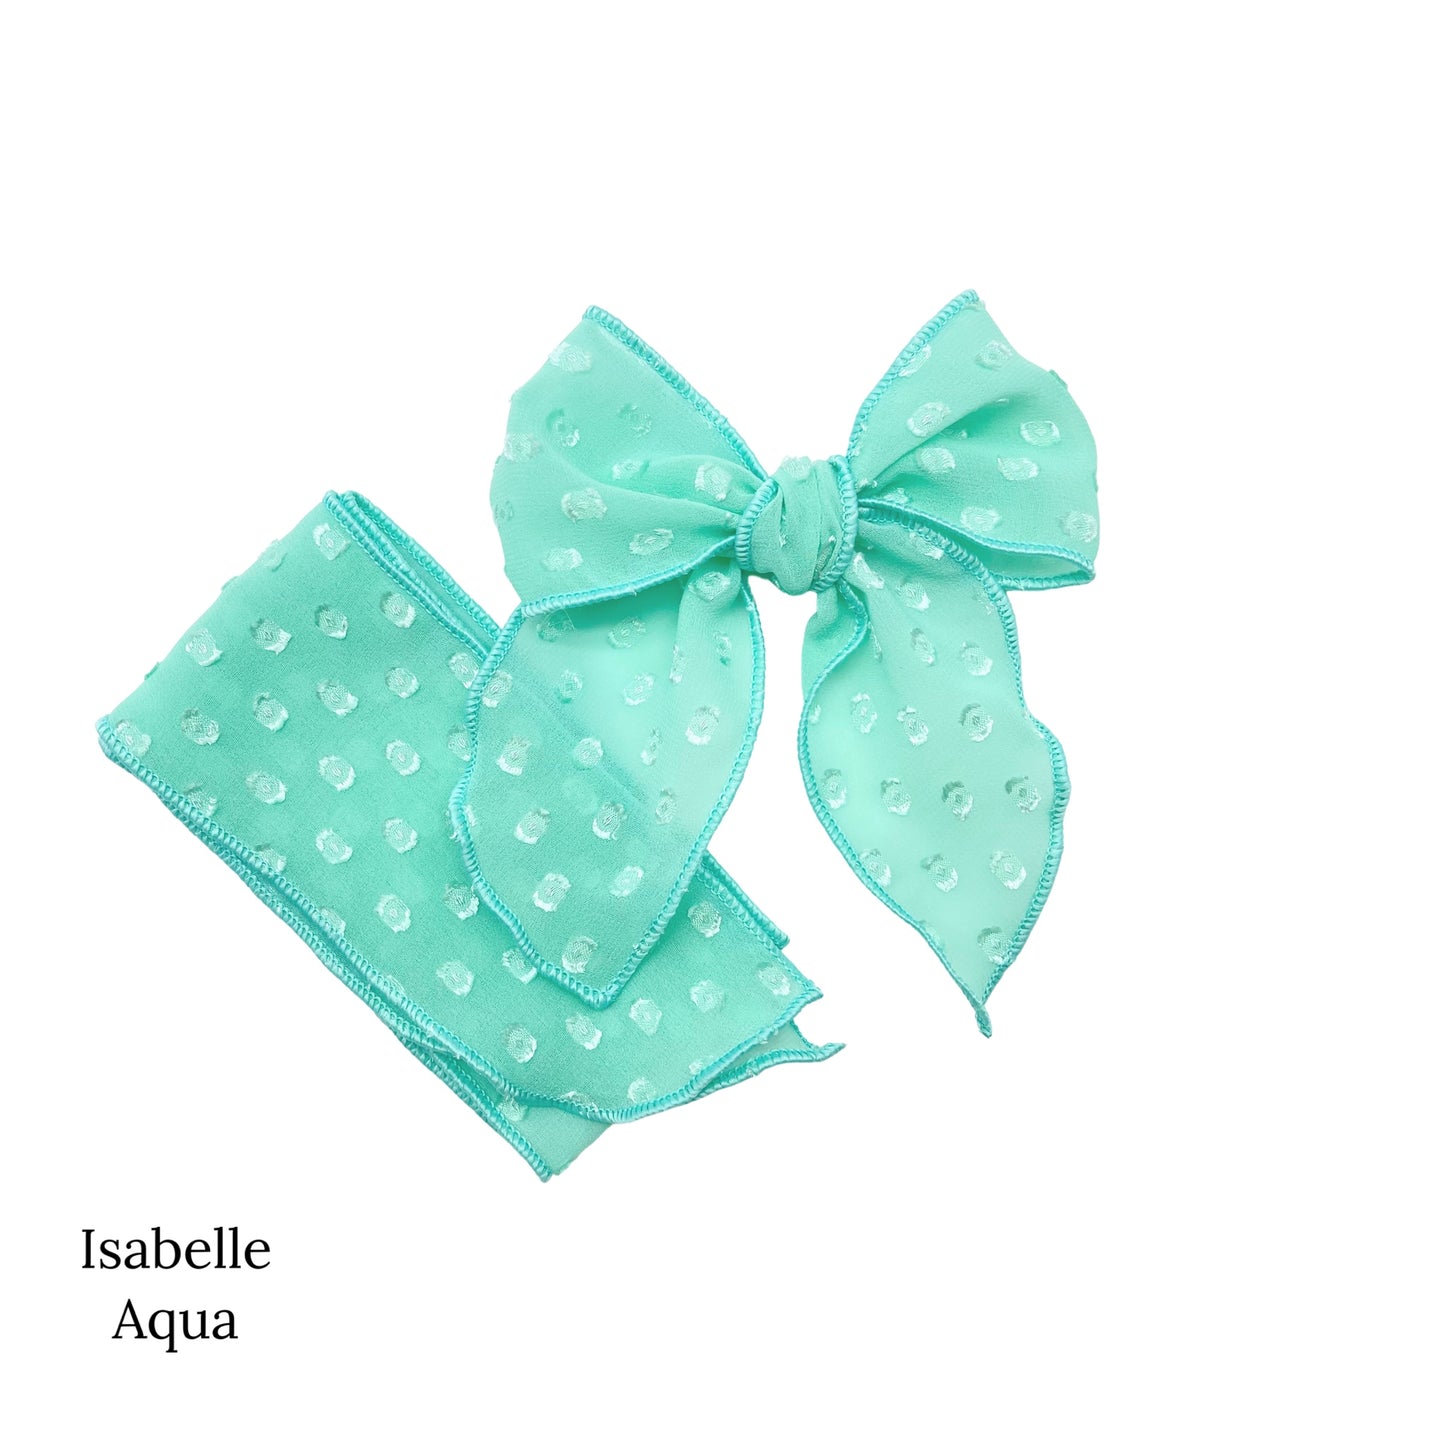 Spring frayed dot fabric bow strips. Aqua colored serger style bow strip.